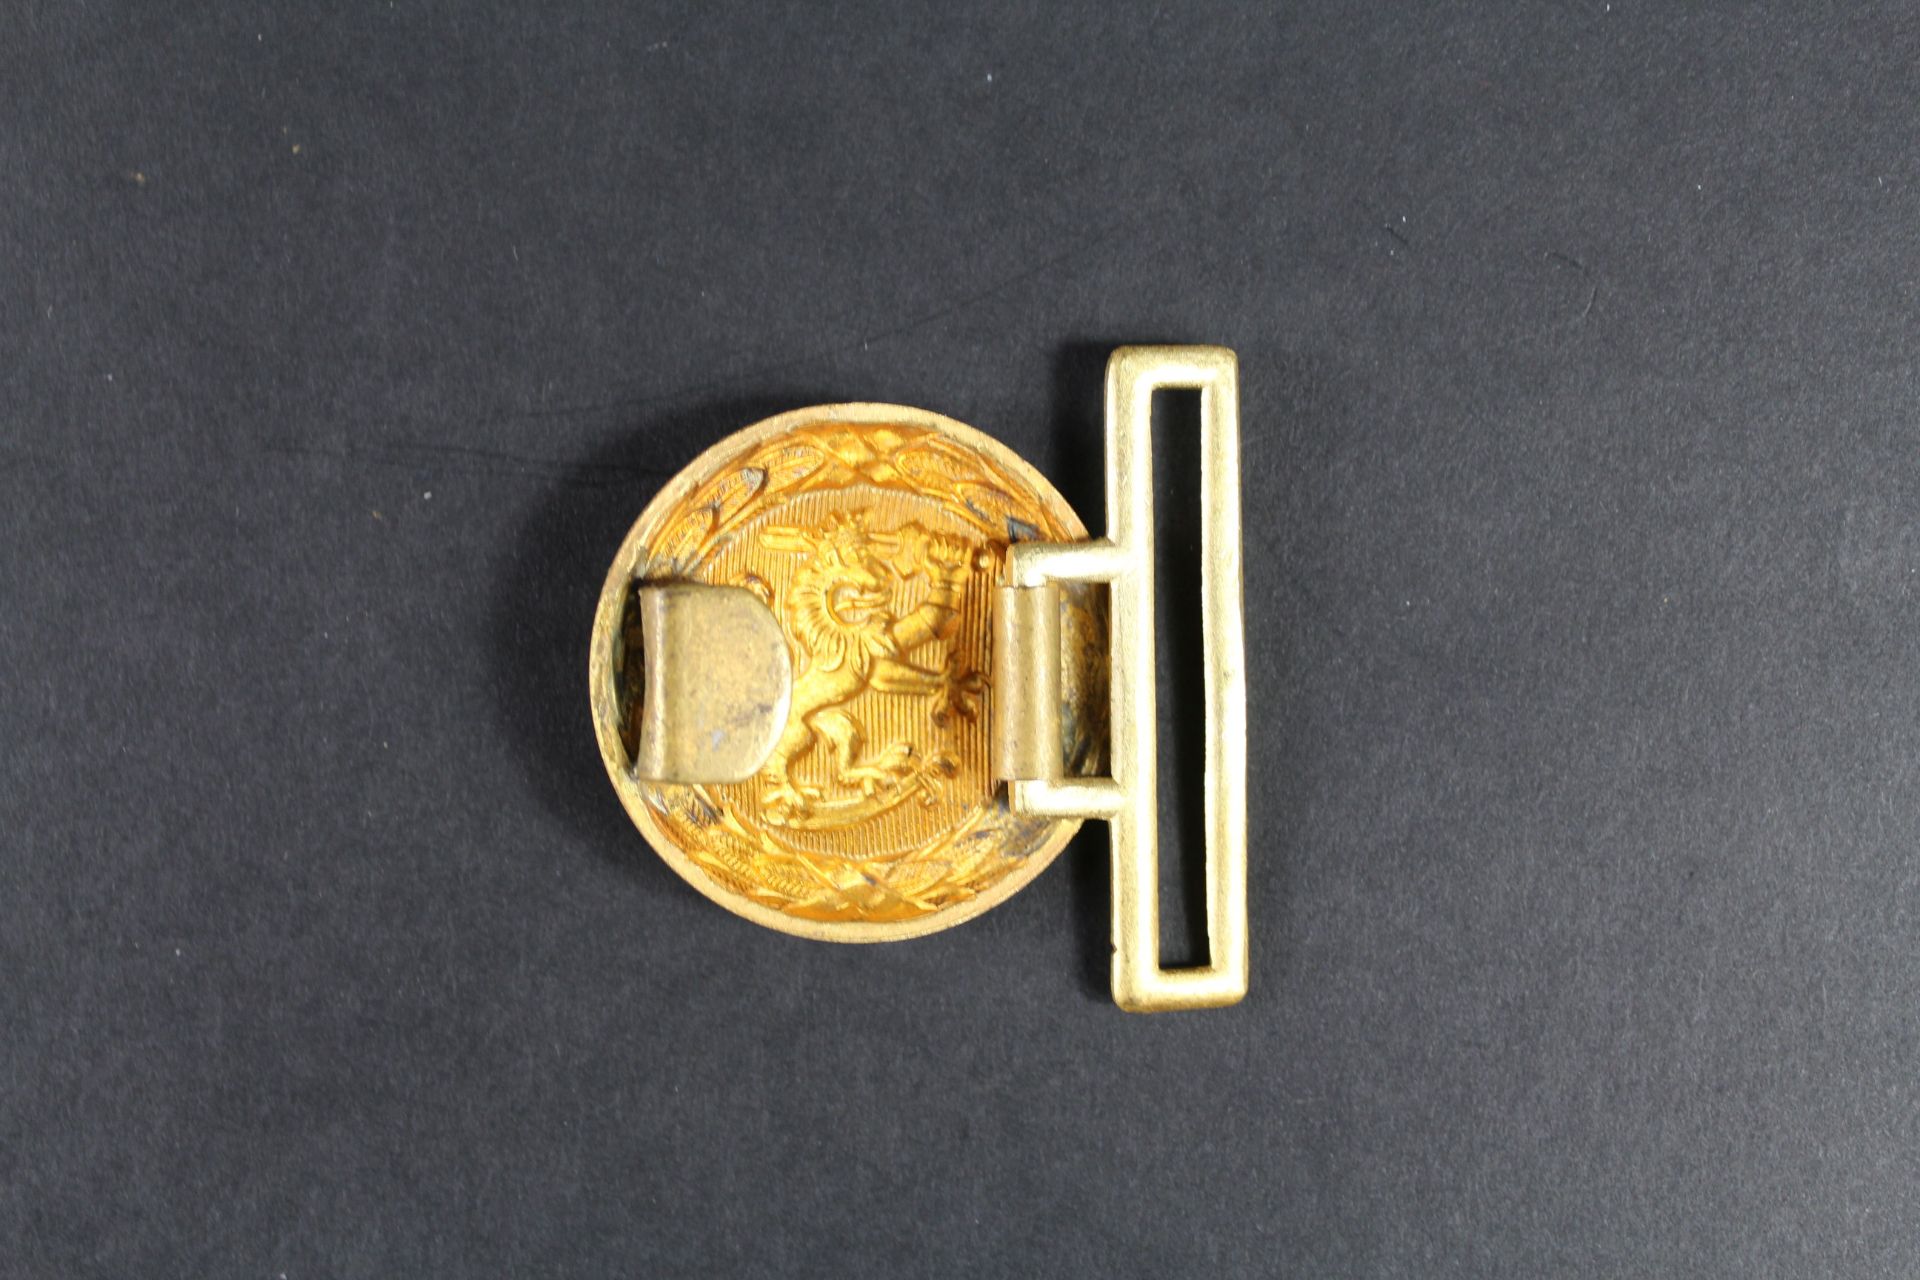 Boucle forestier bavarois. Bayern forestry belt buckle.  - Image 2 of 2